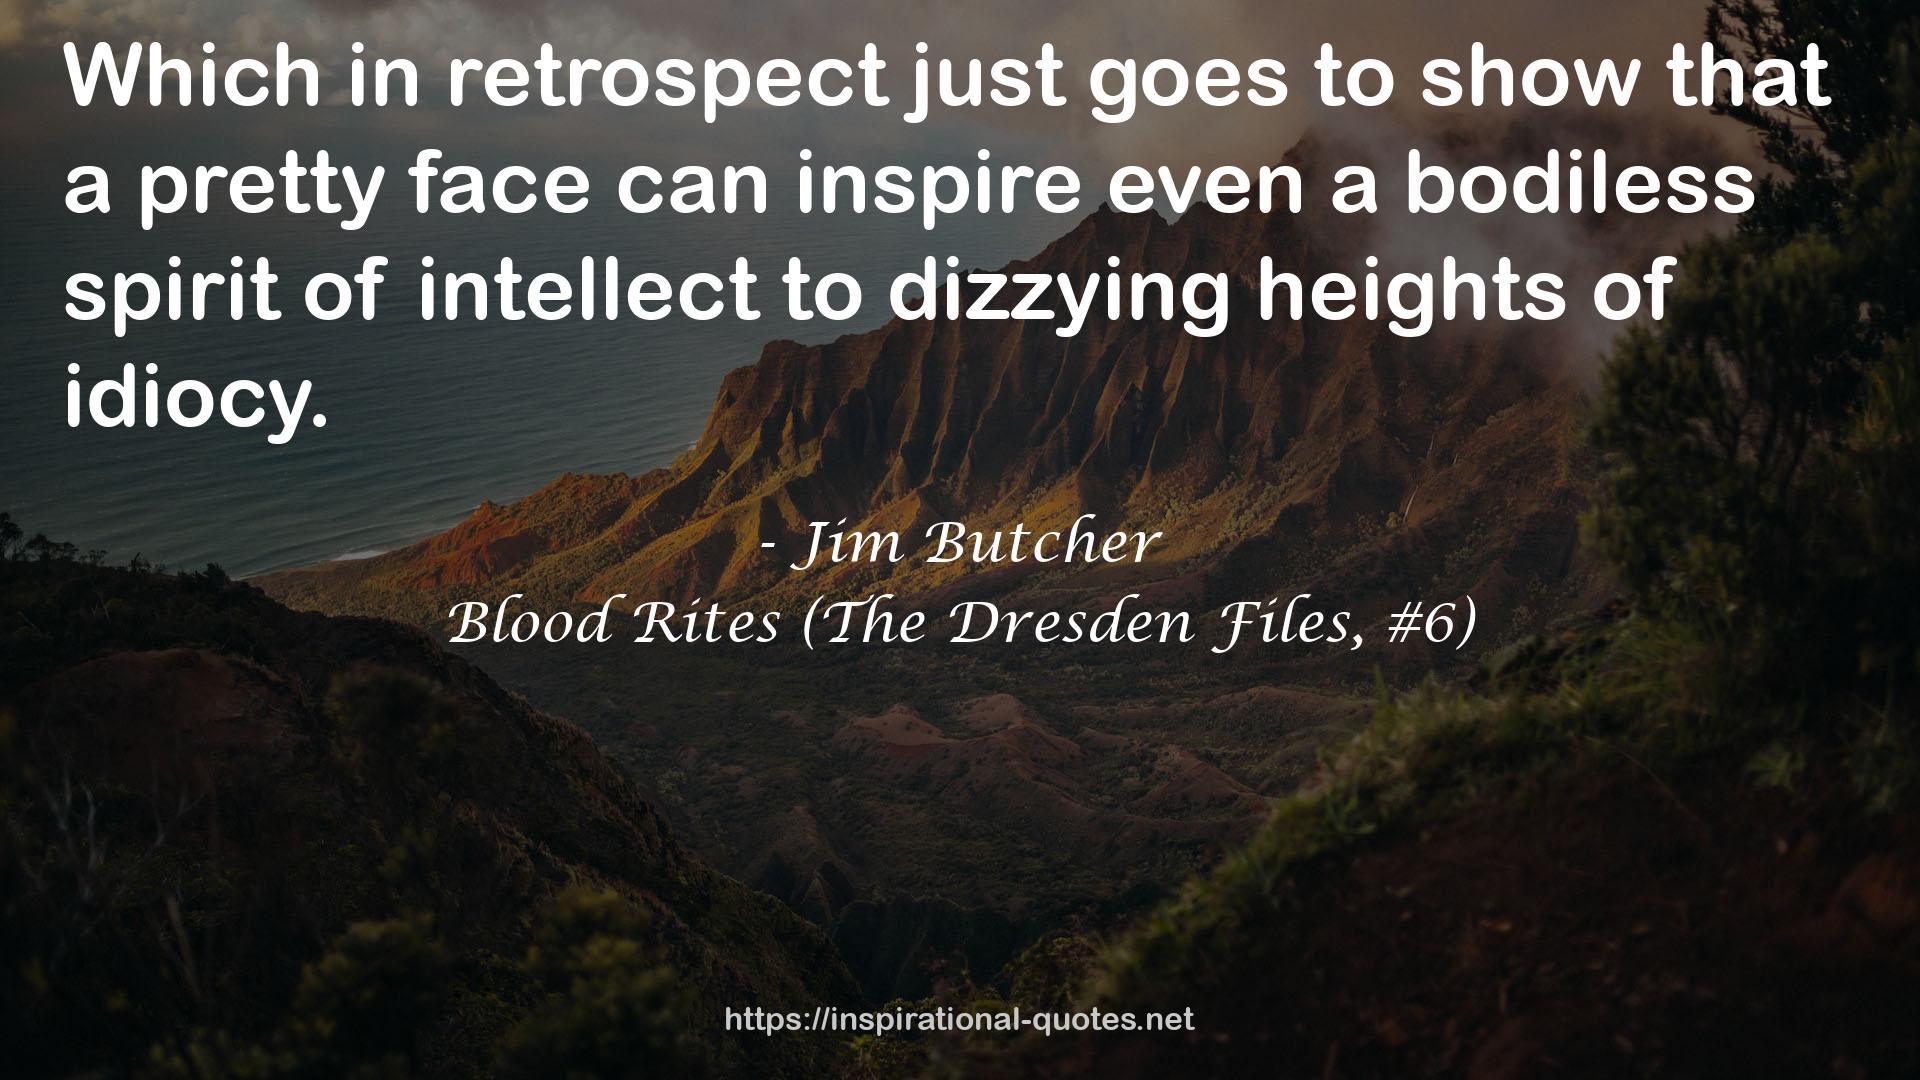 Blood Rites (The Dresden Files, #6) QUOTES